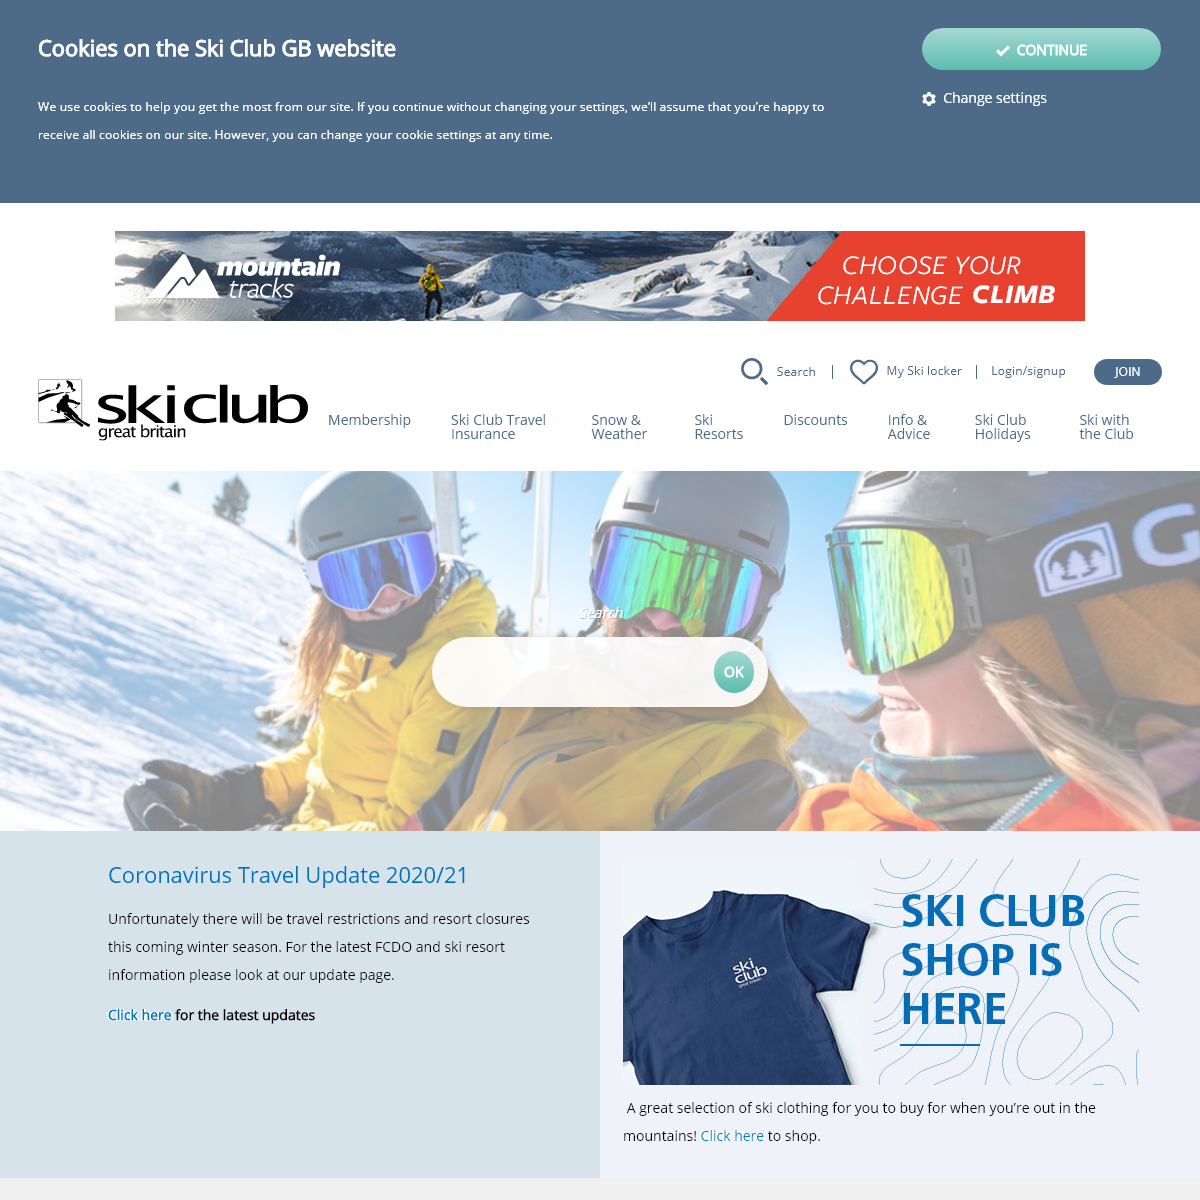 A complete backup of skiclub.co.uk